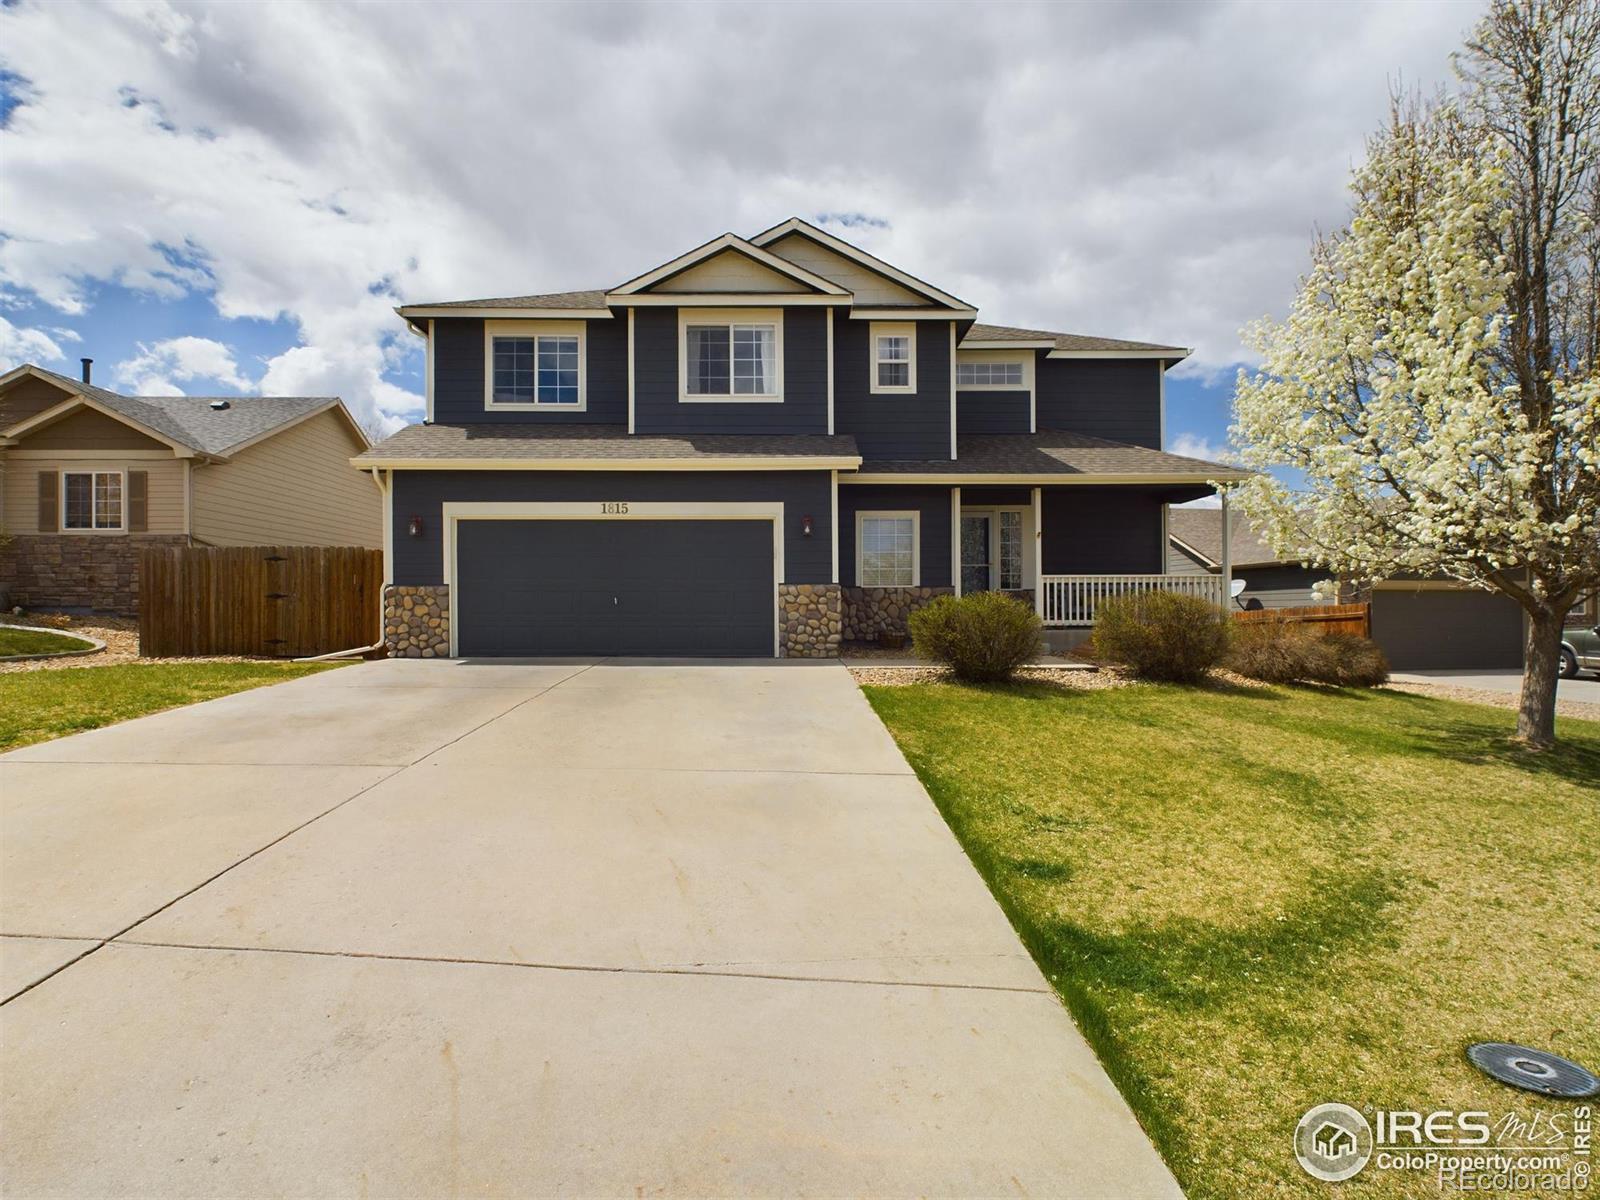 1815  88th Avenue, greeley MLS: 4567891007497 Beds: 4 Baths: 4 Price: $470,000